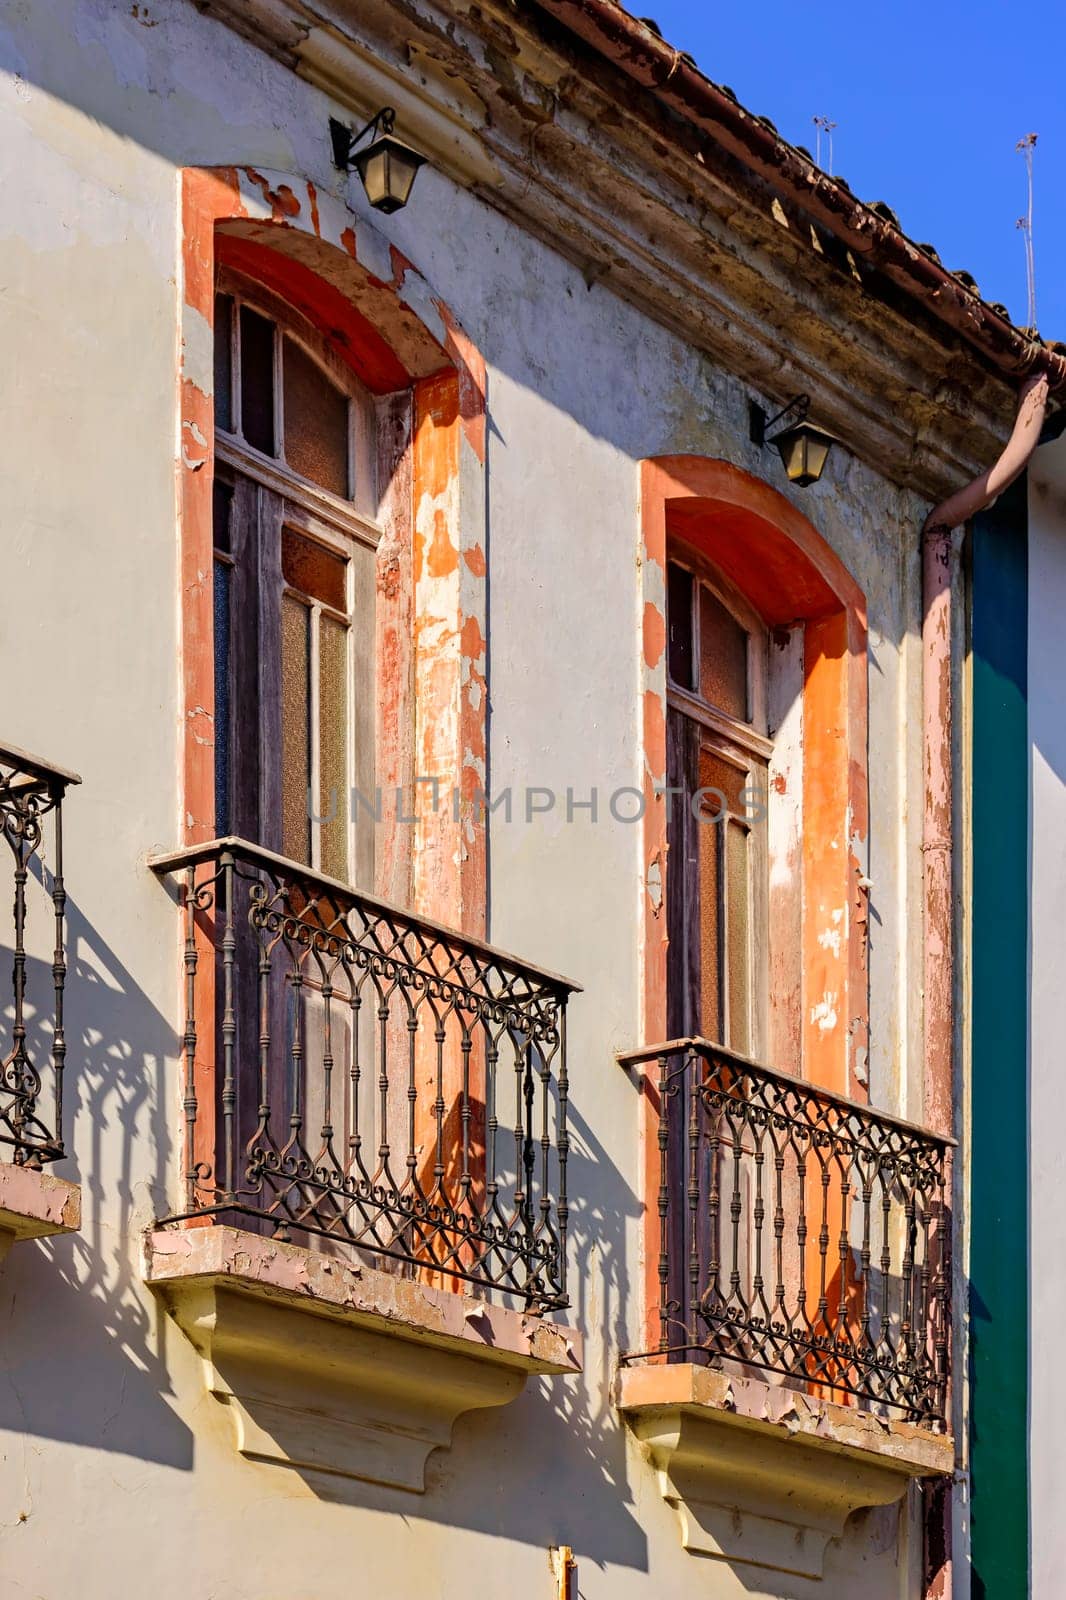 Window of old colonial style house with balcony and colorful frame with peeling paint in the ancient city of Ouro Preto in Minas Gerais, Brazil